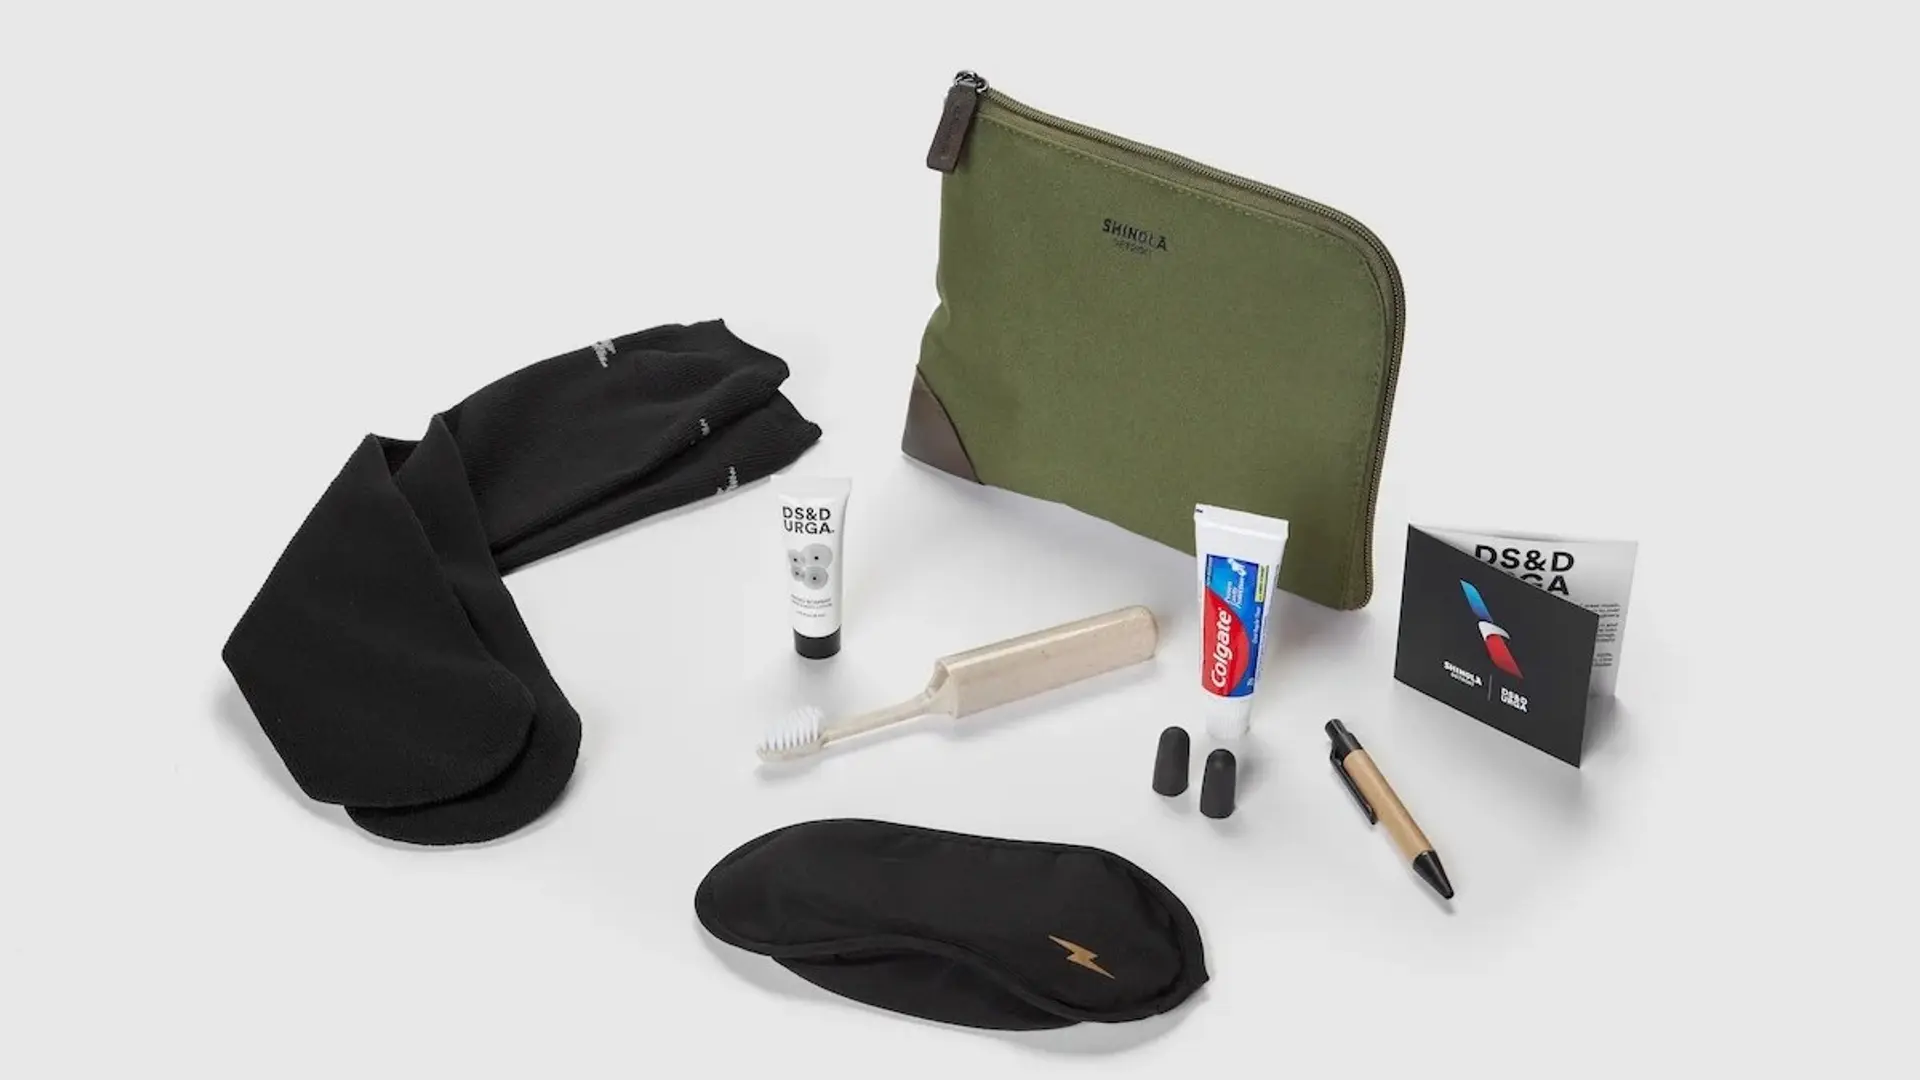 Airlines News - American Airlines introduces new premium amenity kits